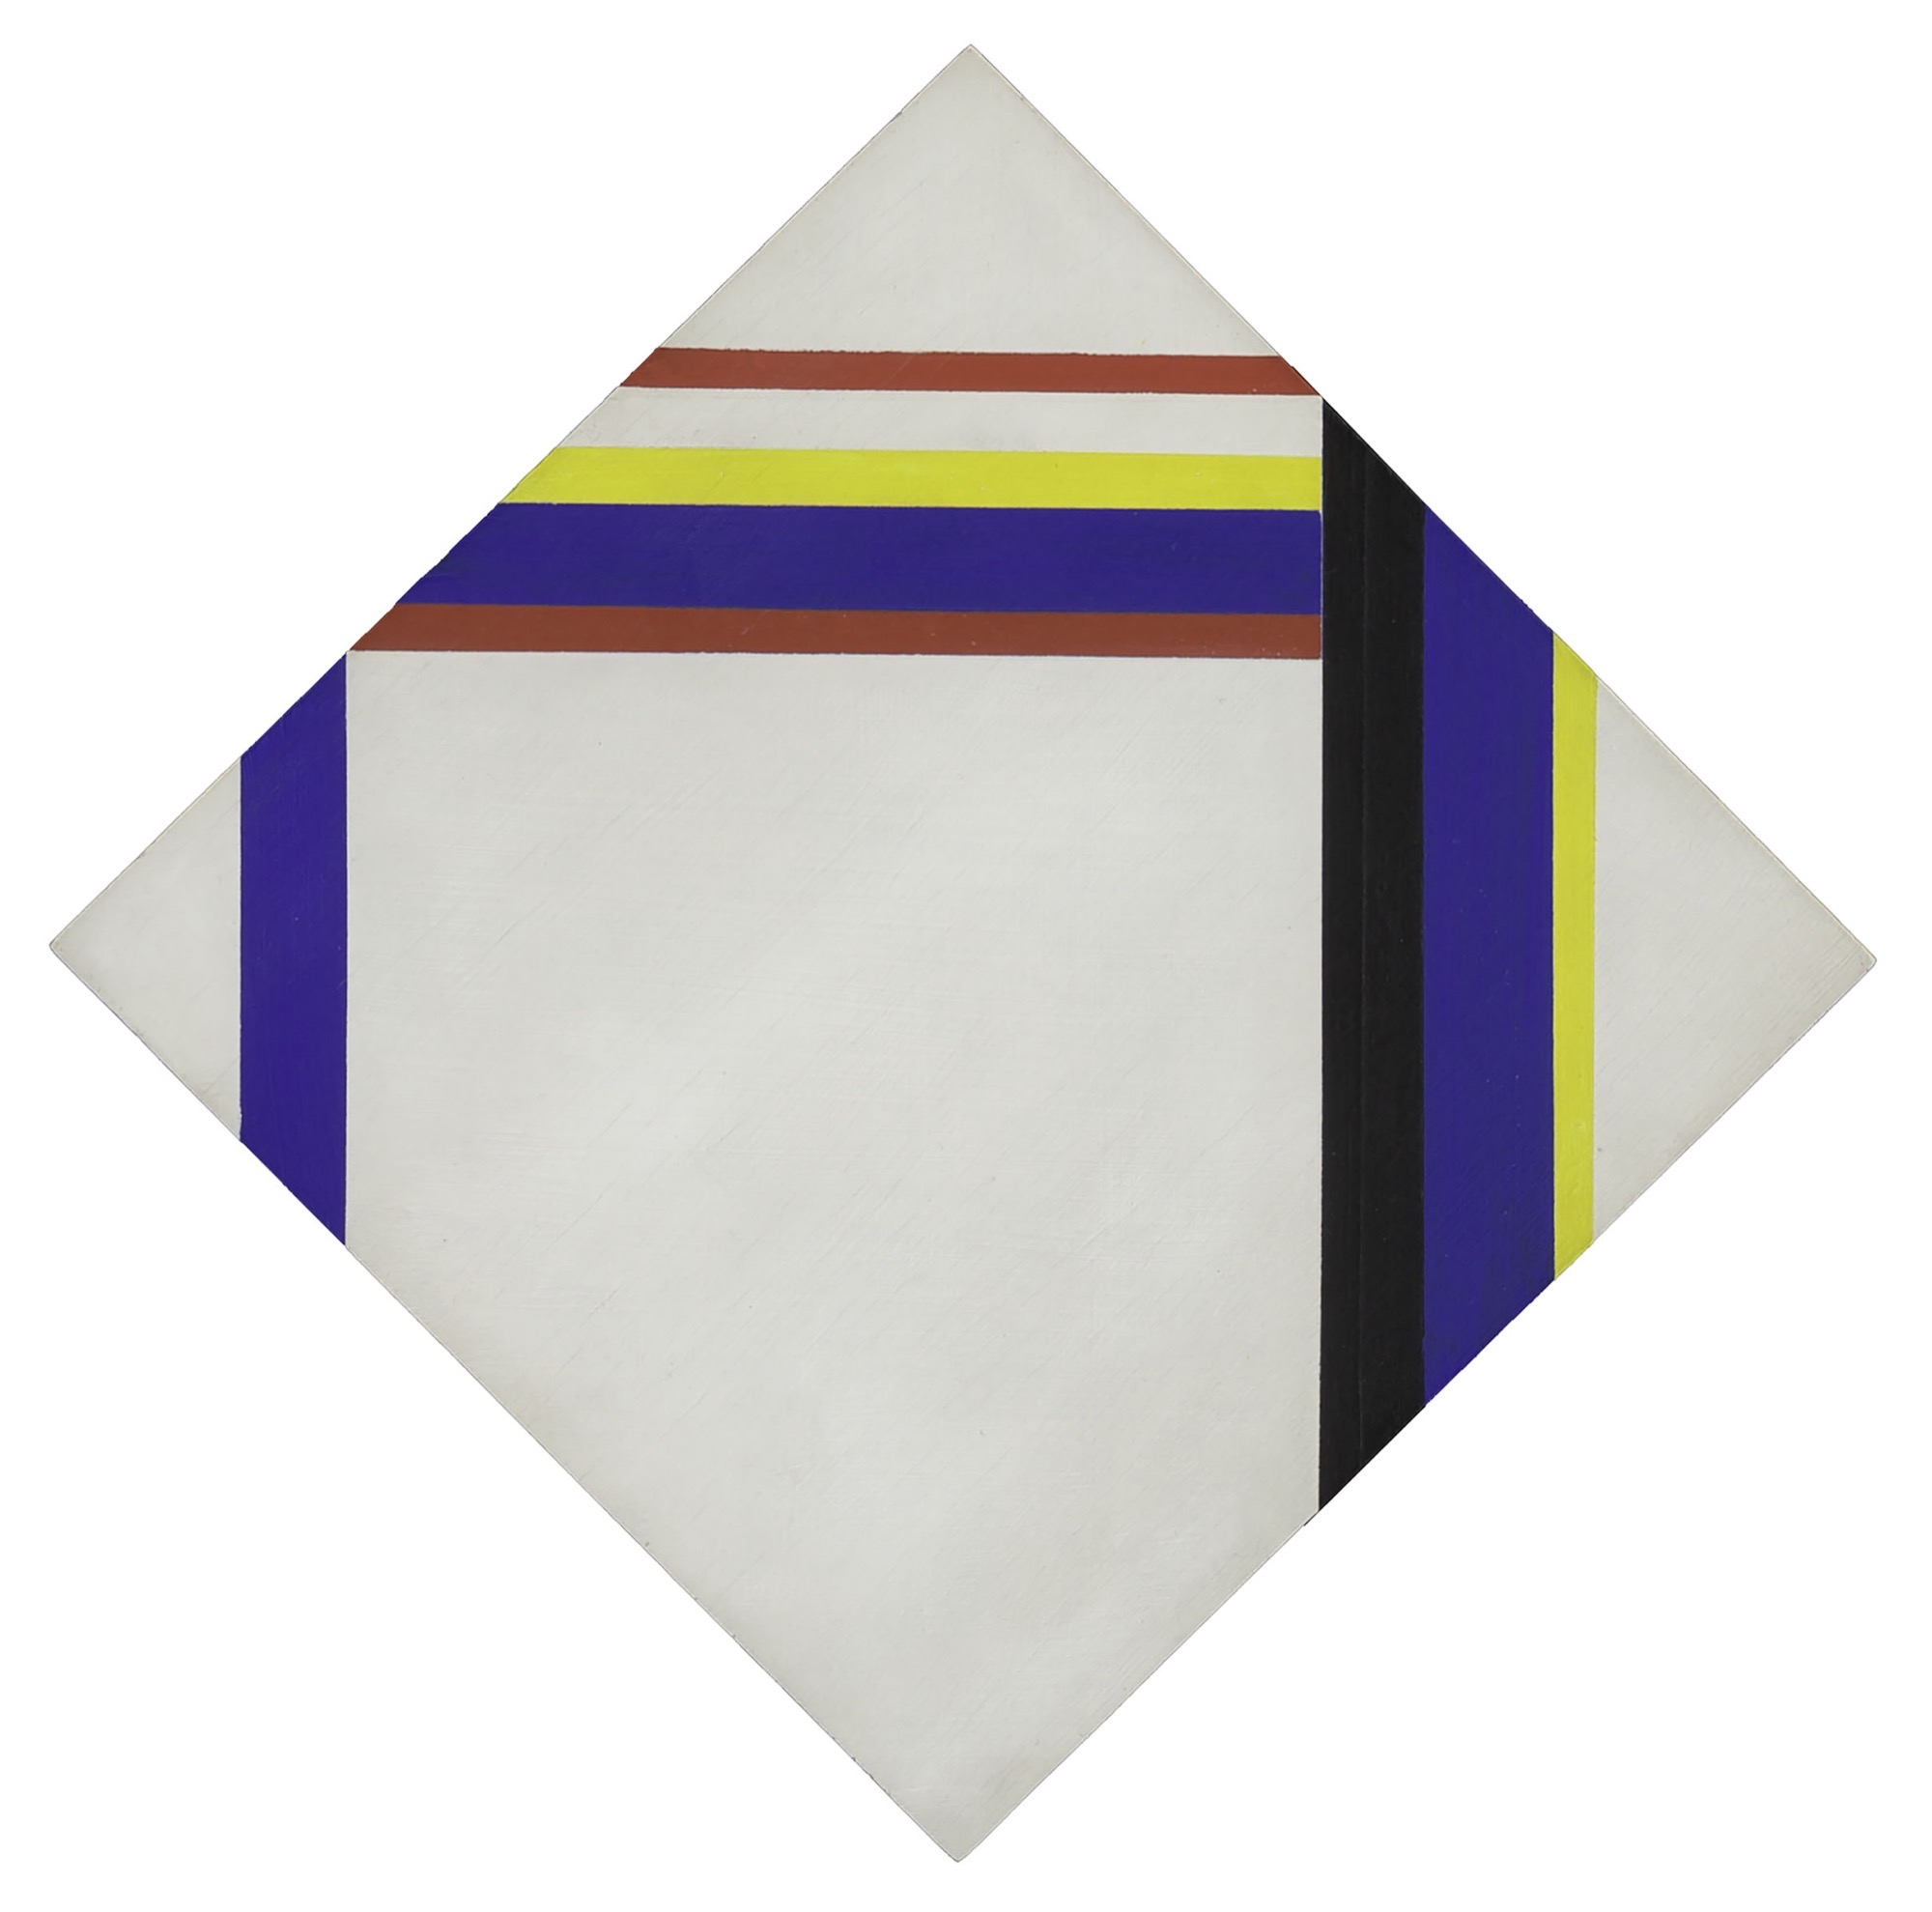 A diamond shaped canvas consisting of different colored lines